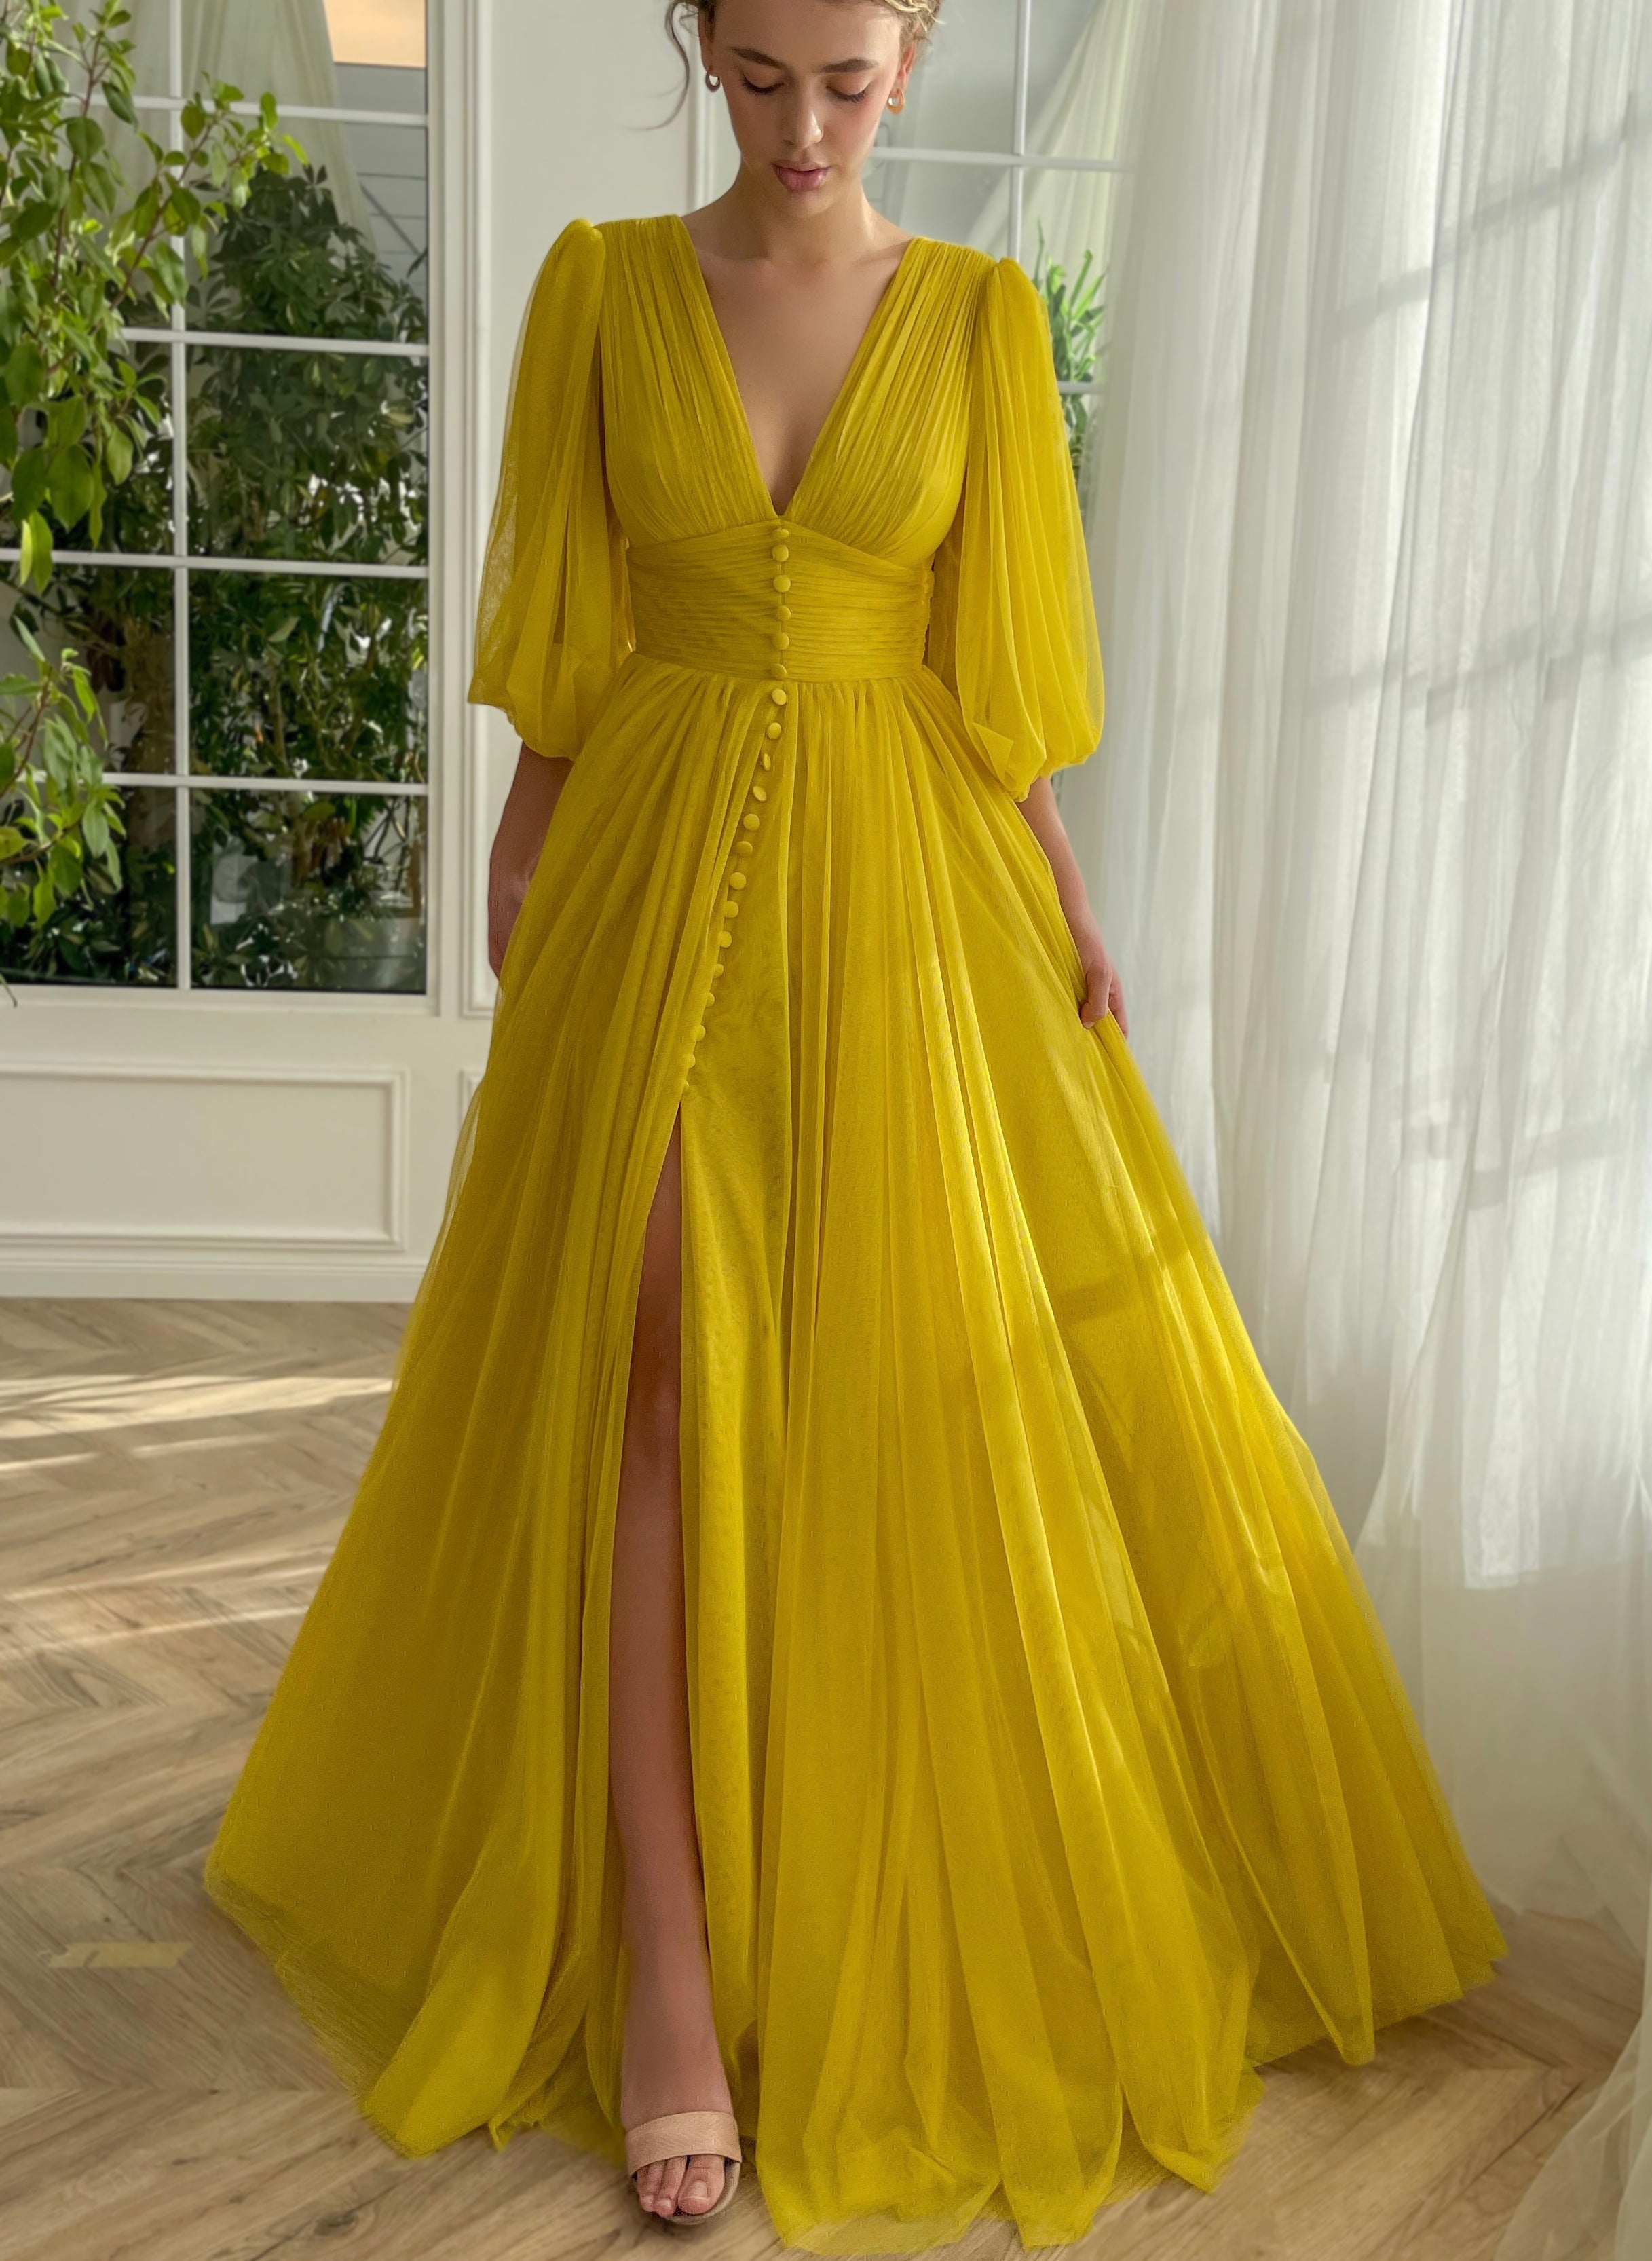 Yellow A-Line dress with long sleeves and v-neck